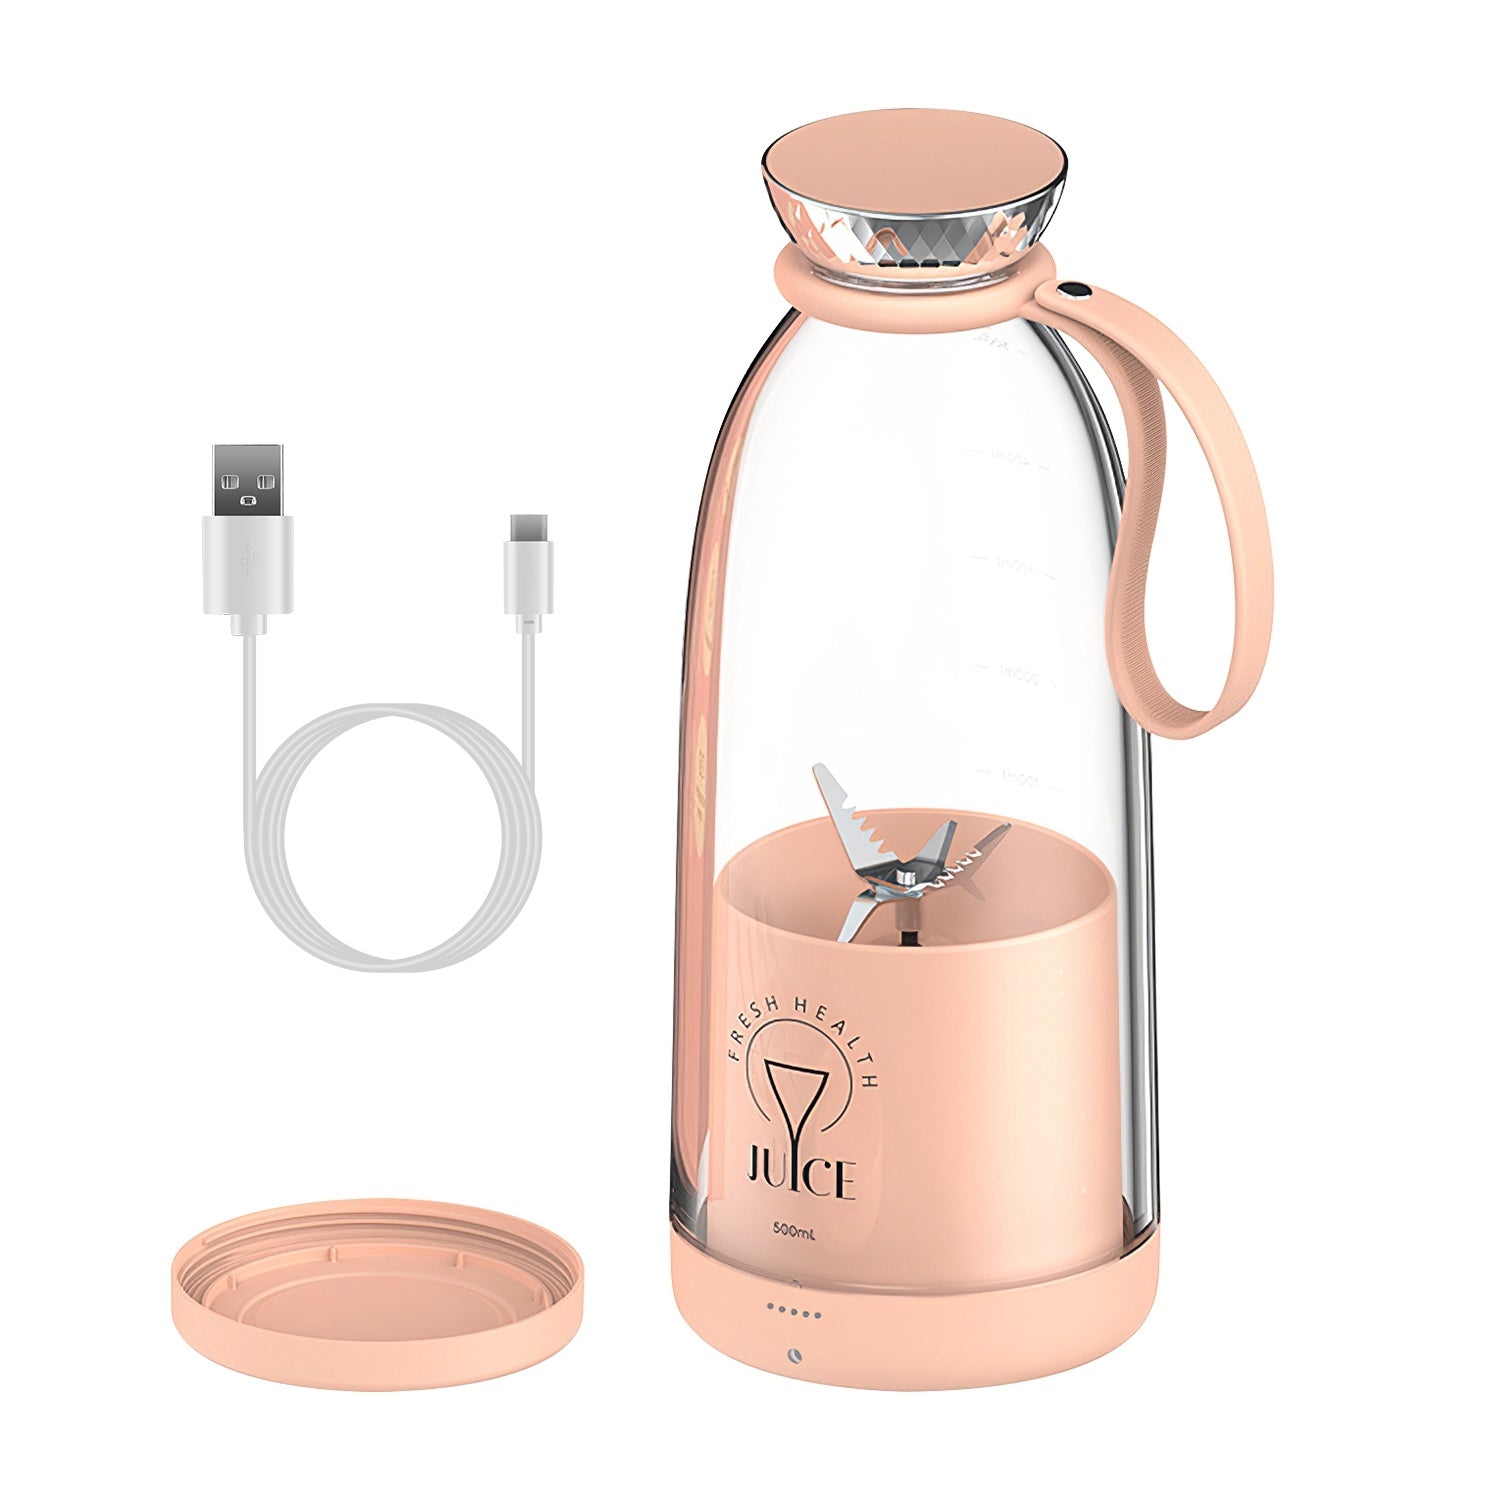 A portable glass water bottle with a USB charger and 16.9OZ Portable Fruit Blender Electric Rechargeable Juice Cup for Shakes Smoothies Juice Personal Fruit Mixer with 6 Blades capacity.